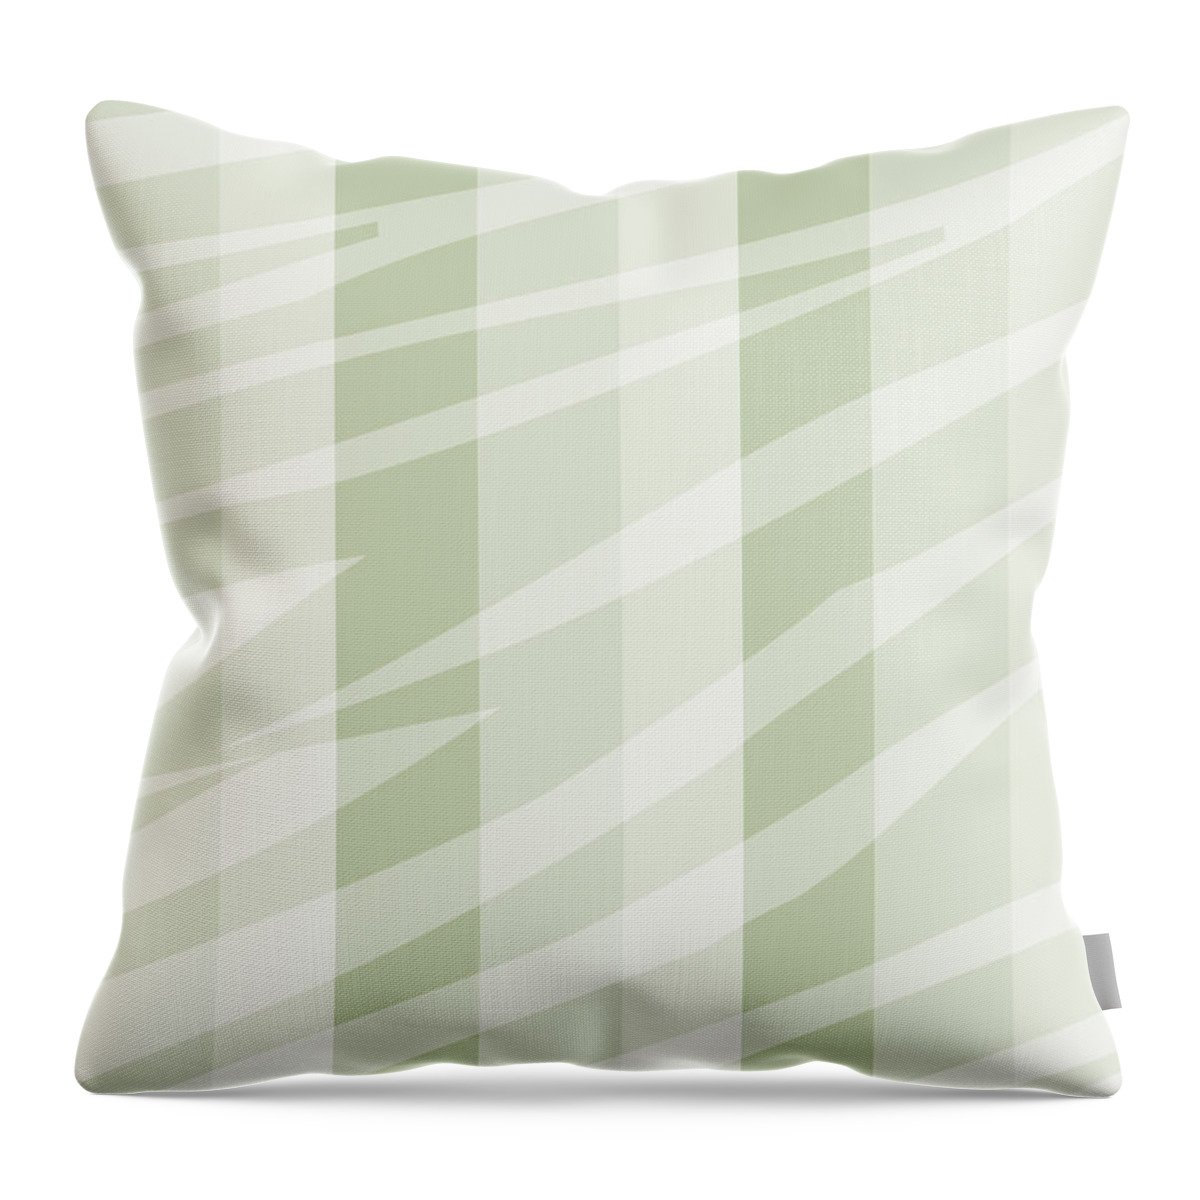 Chic Zebra Print Neutral Mint Throw Pillow For Sale By P S